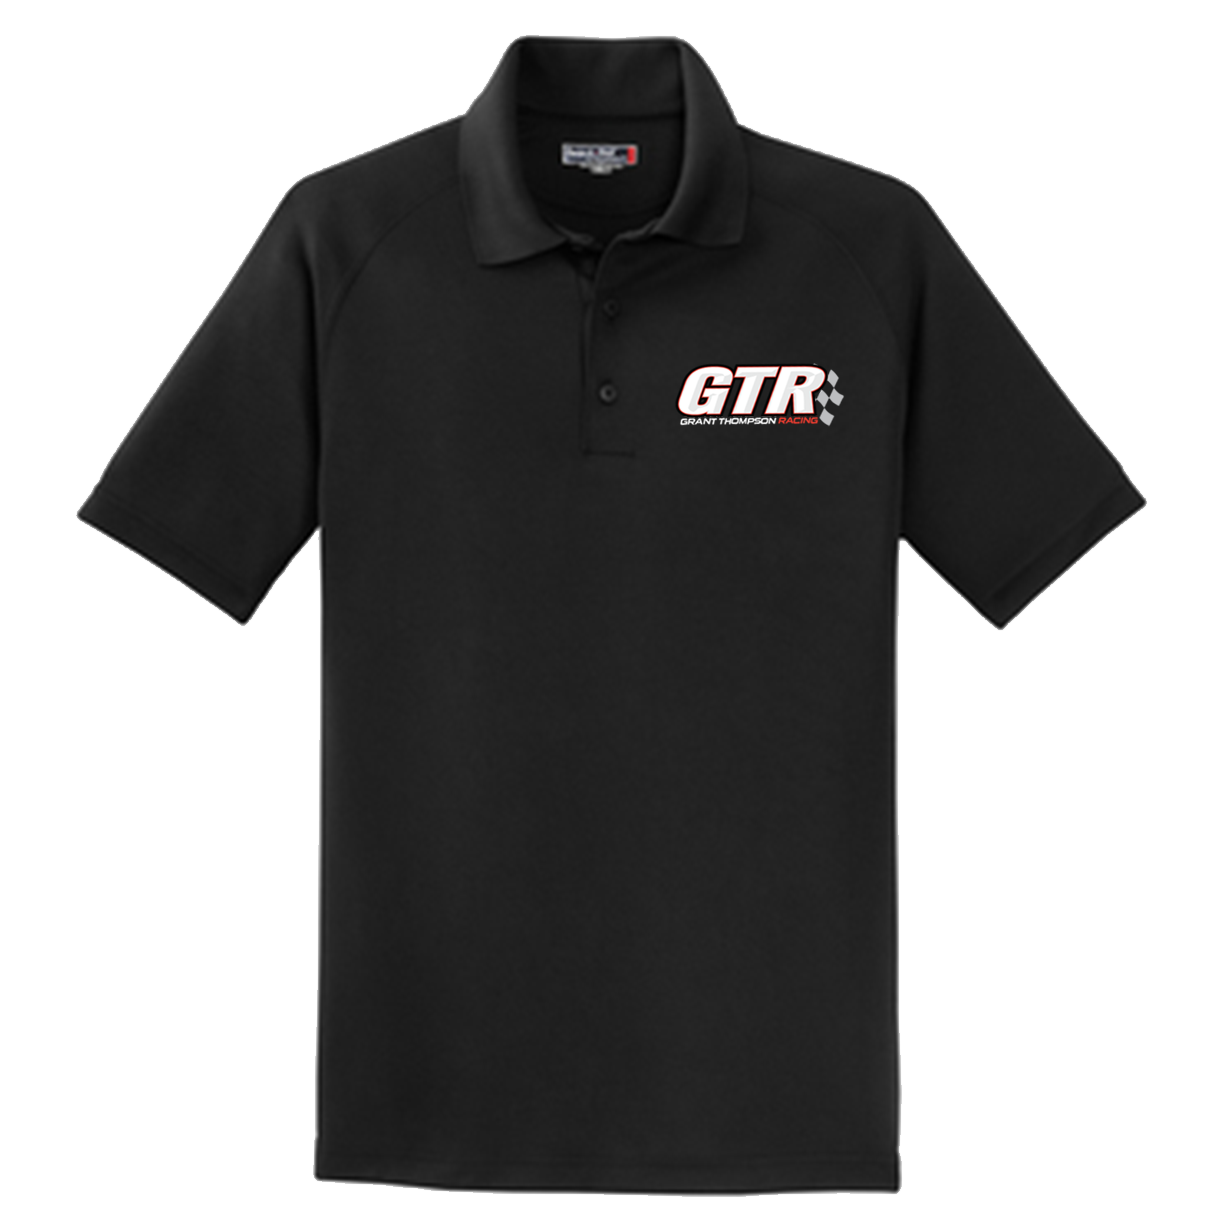 Grant Thompson Embroidered Polo Shirt